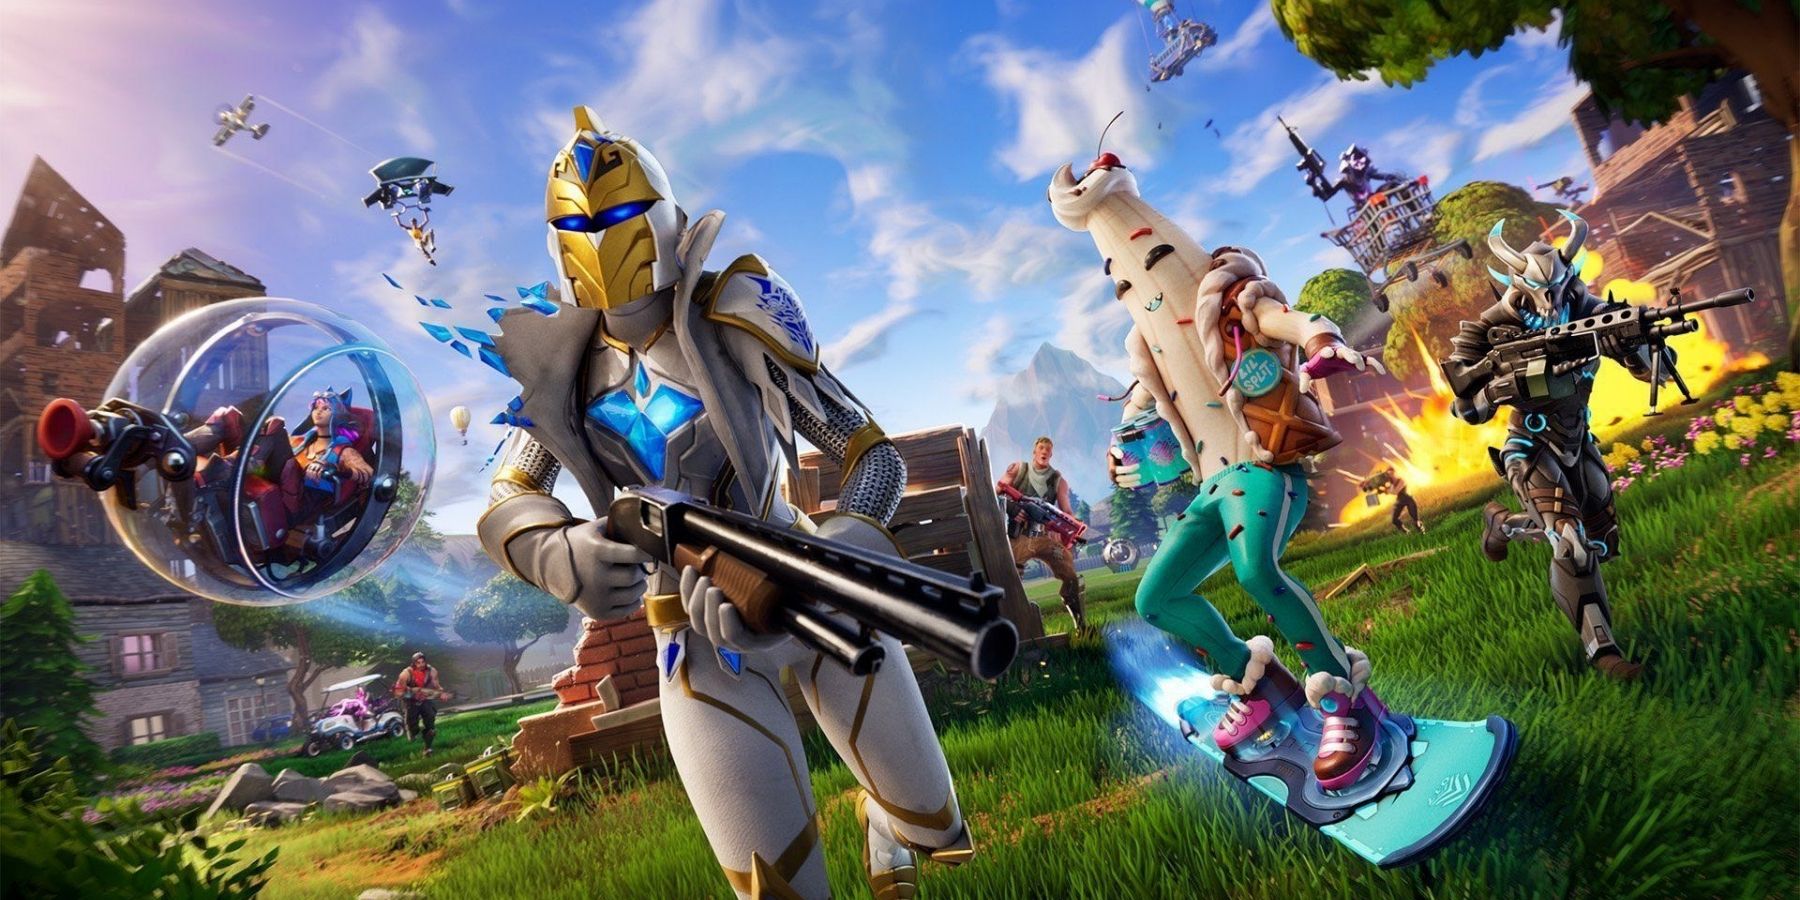 Fortnite: Chapter 2 Season 1 trailer drops - new skins, map and